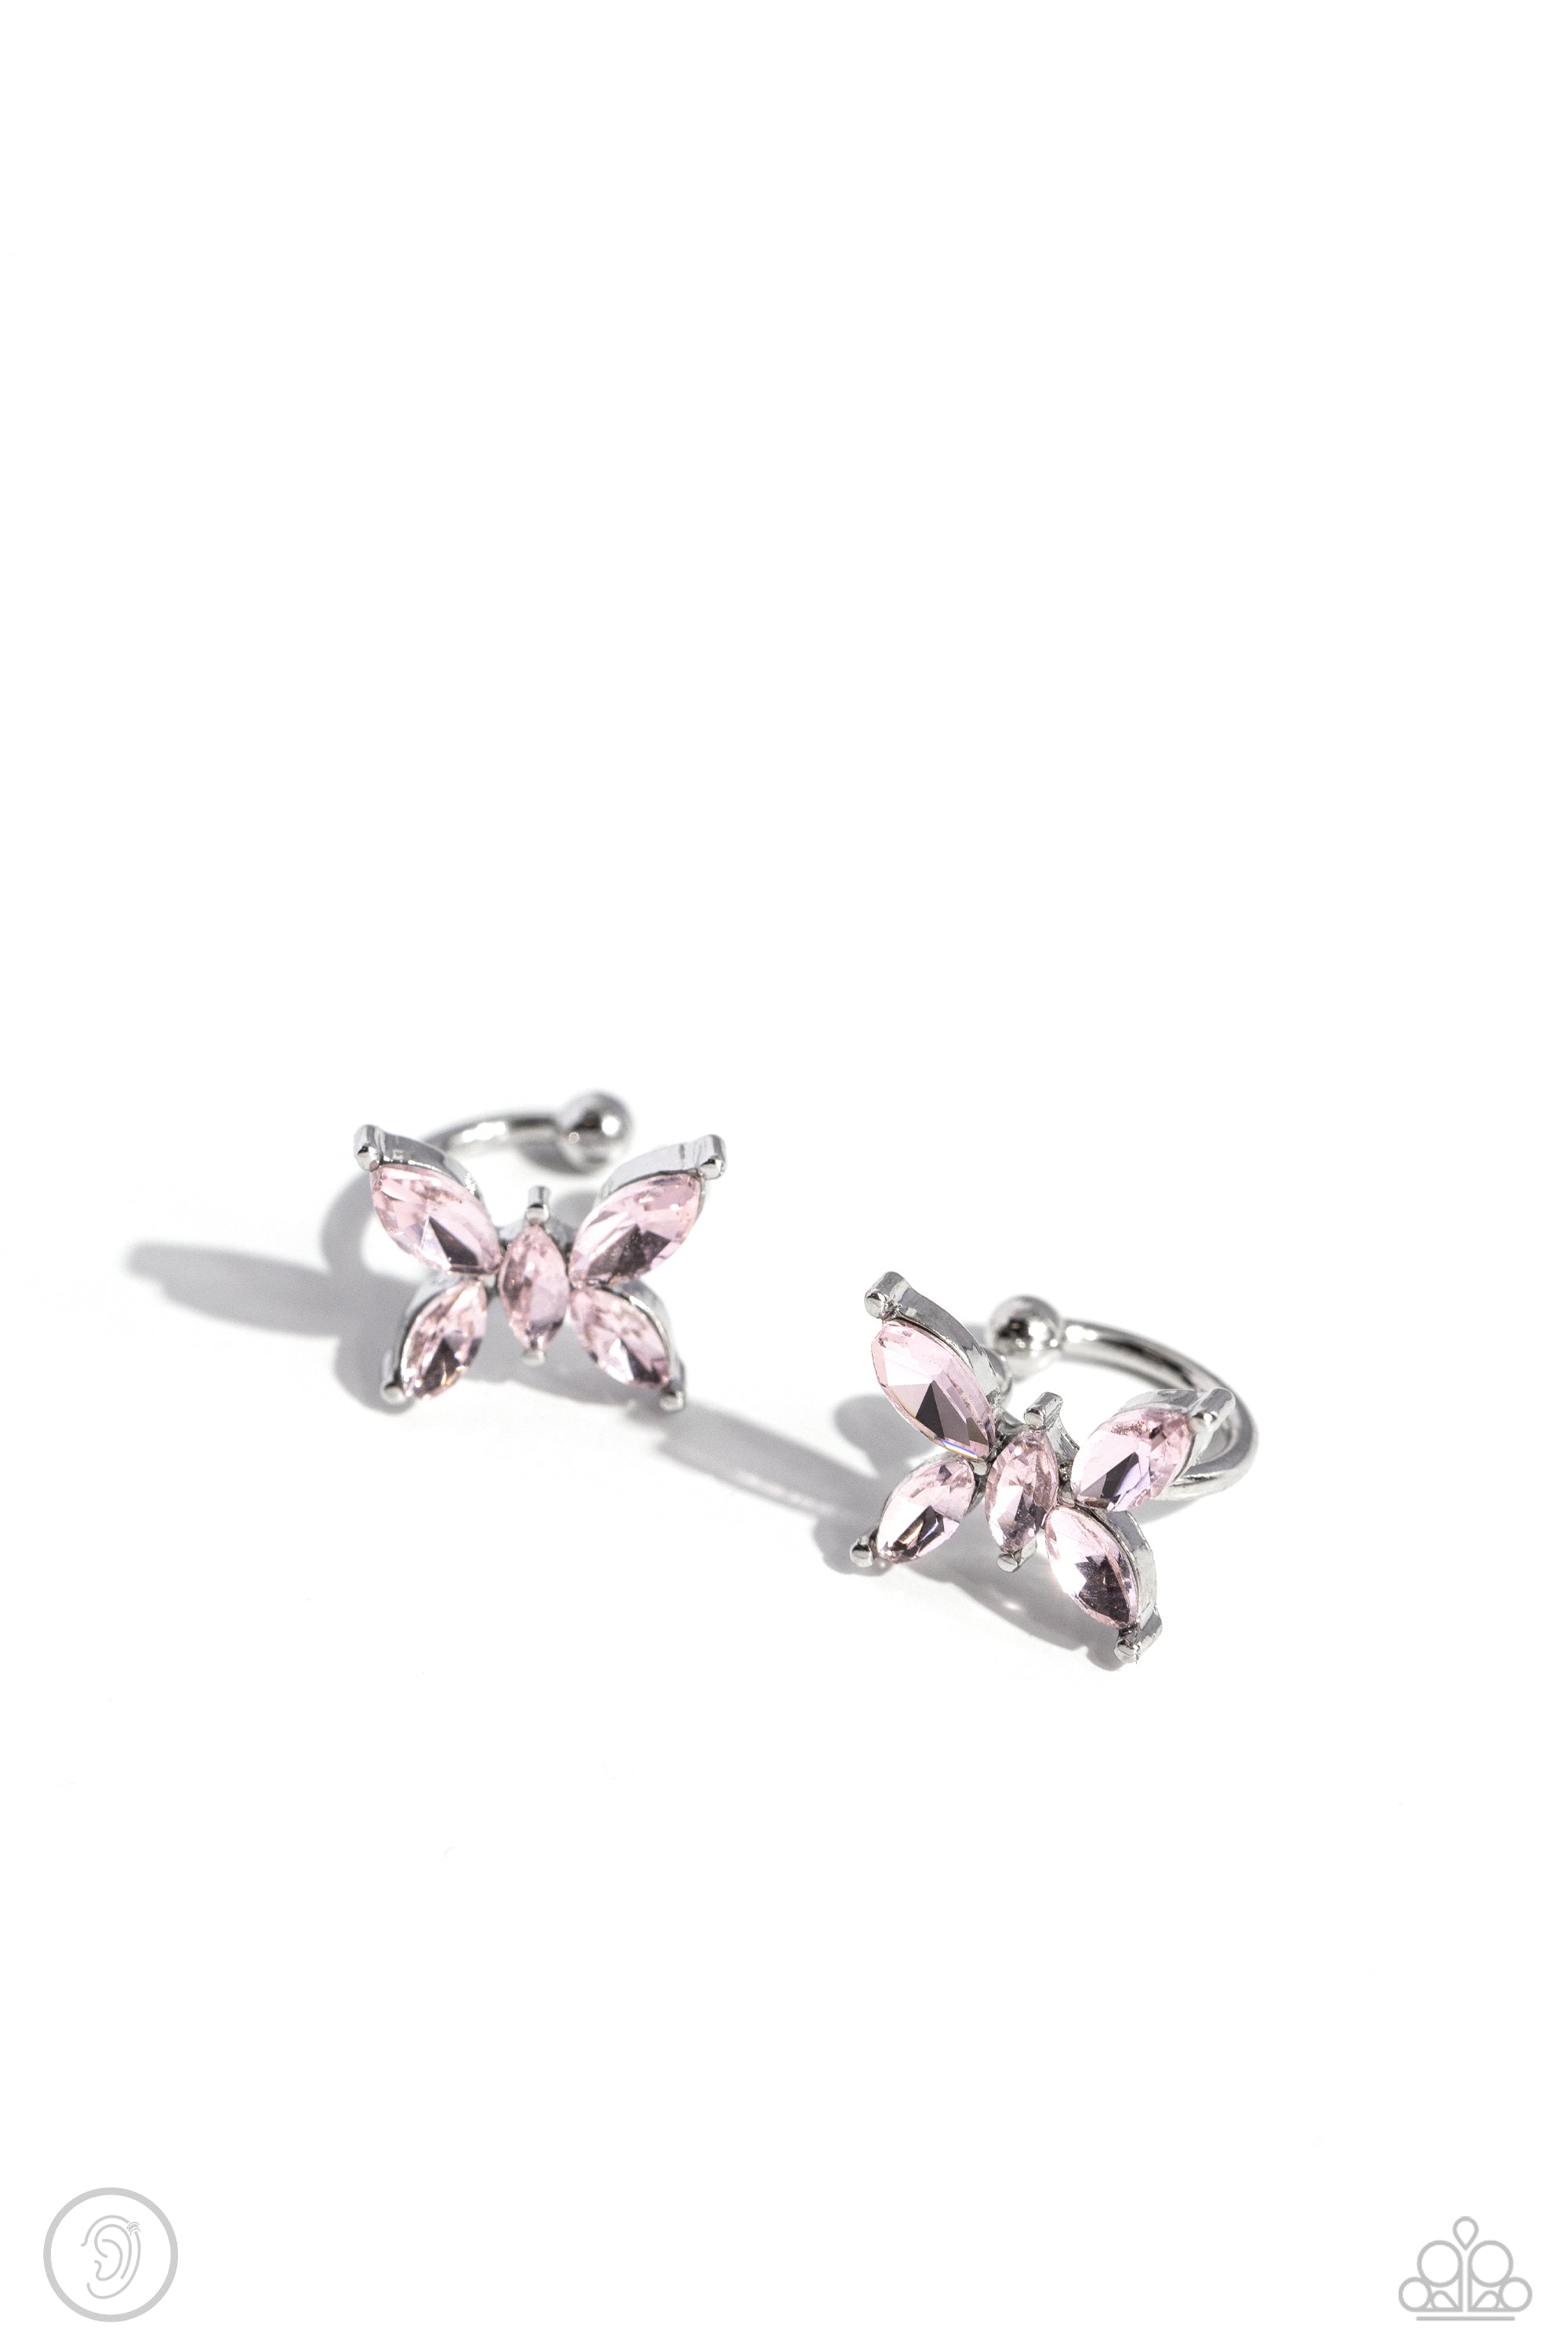 Aerial Advancement Pink Rhinestone Butterfly Cuff Earrings - Paparazzi Accessories- lightbox - CarasShop.com - $5 Jewelry by Cara Jewels